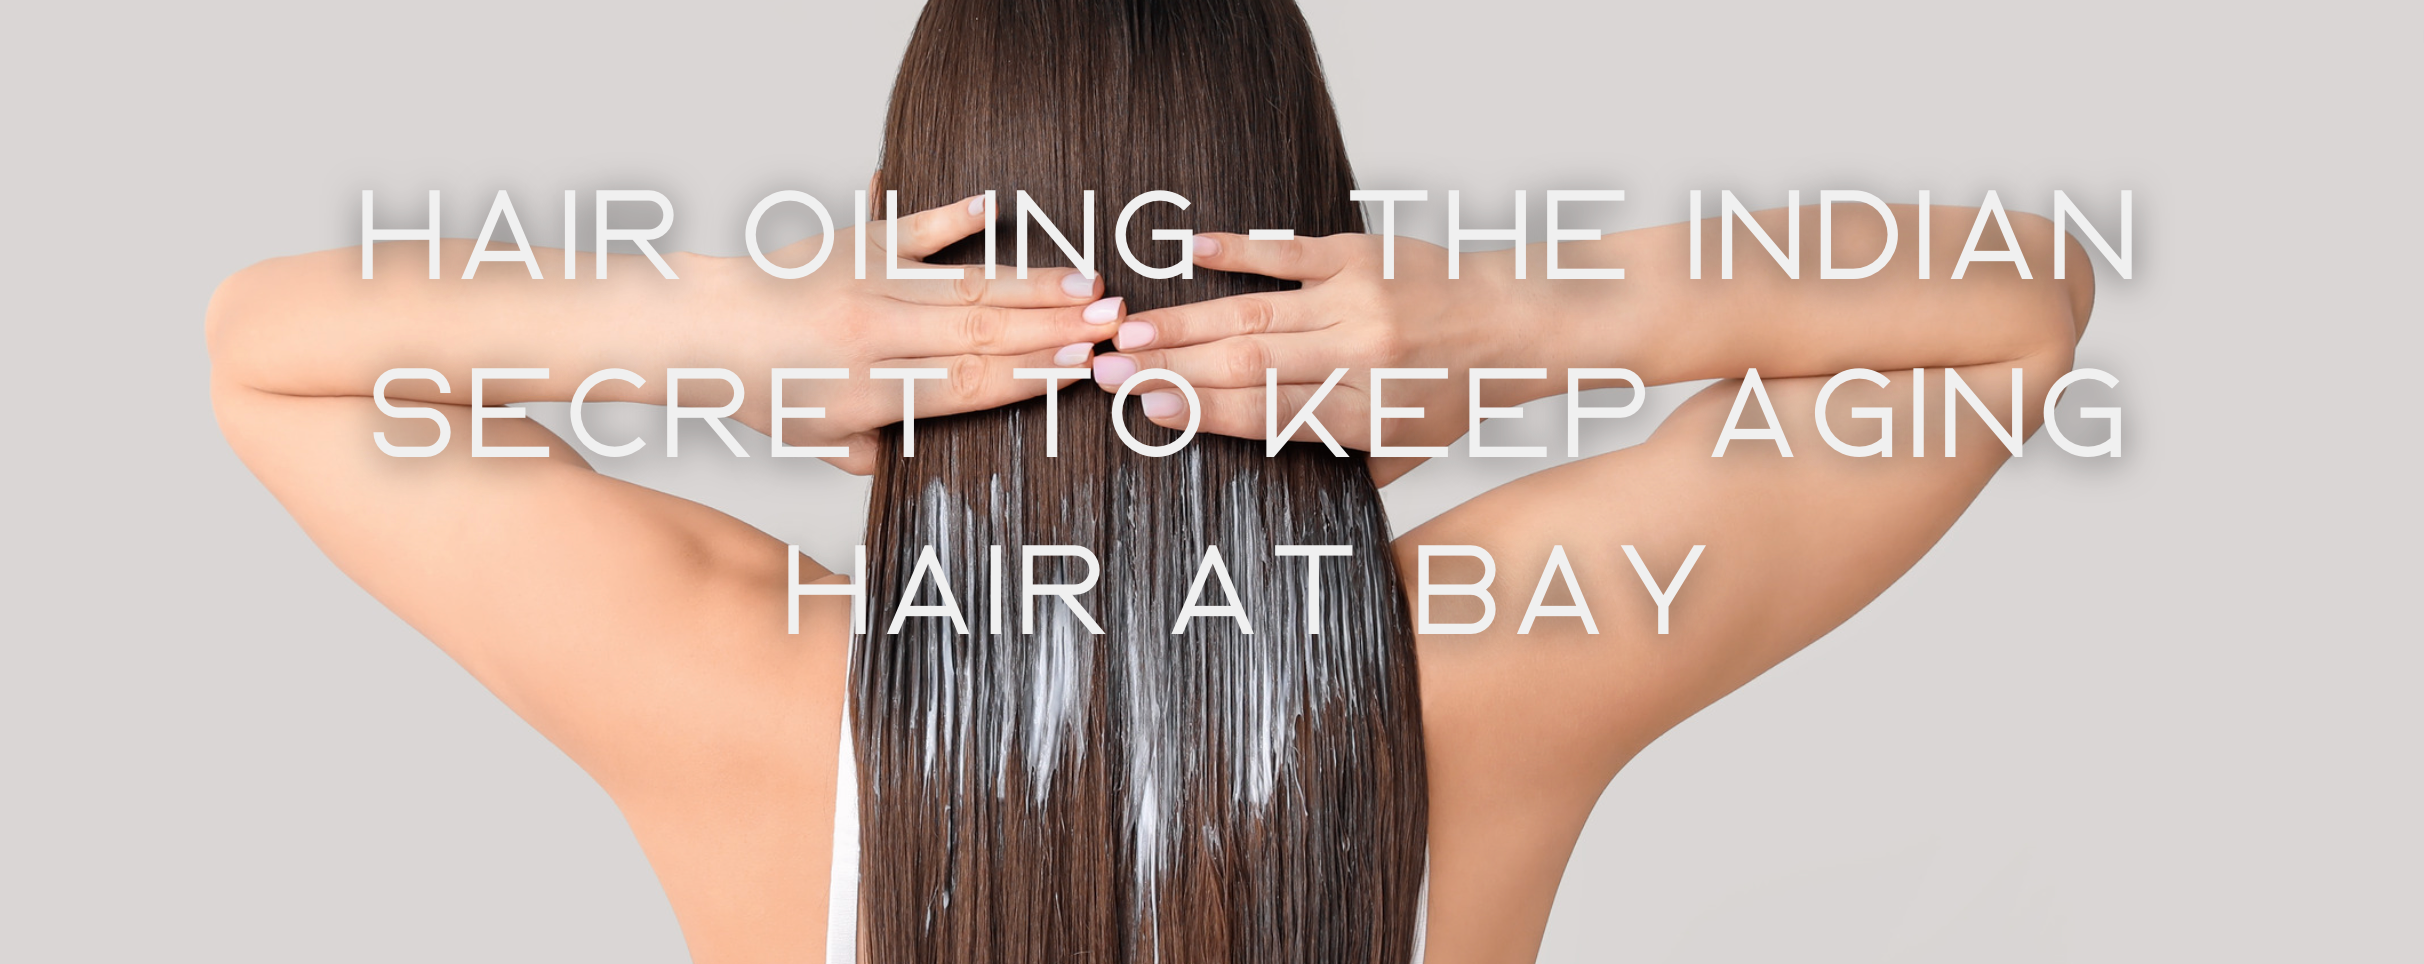 Hair Oiling - The Indian Secret to Keep Aging Hair at Bay